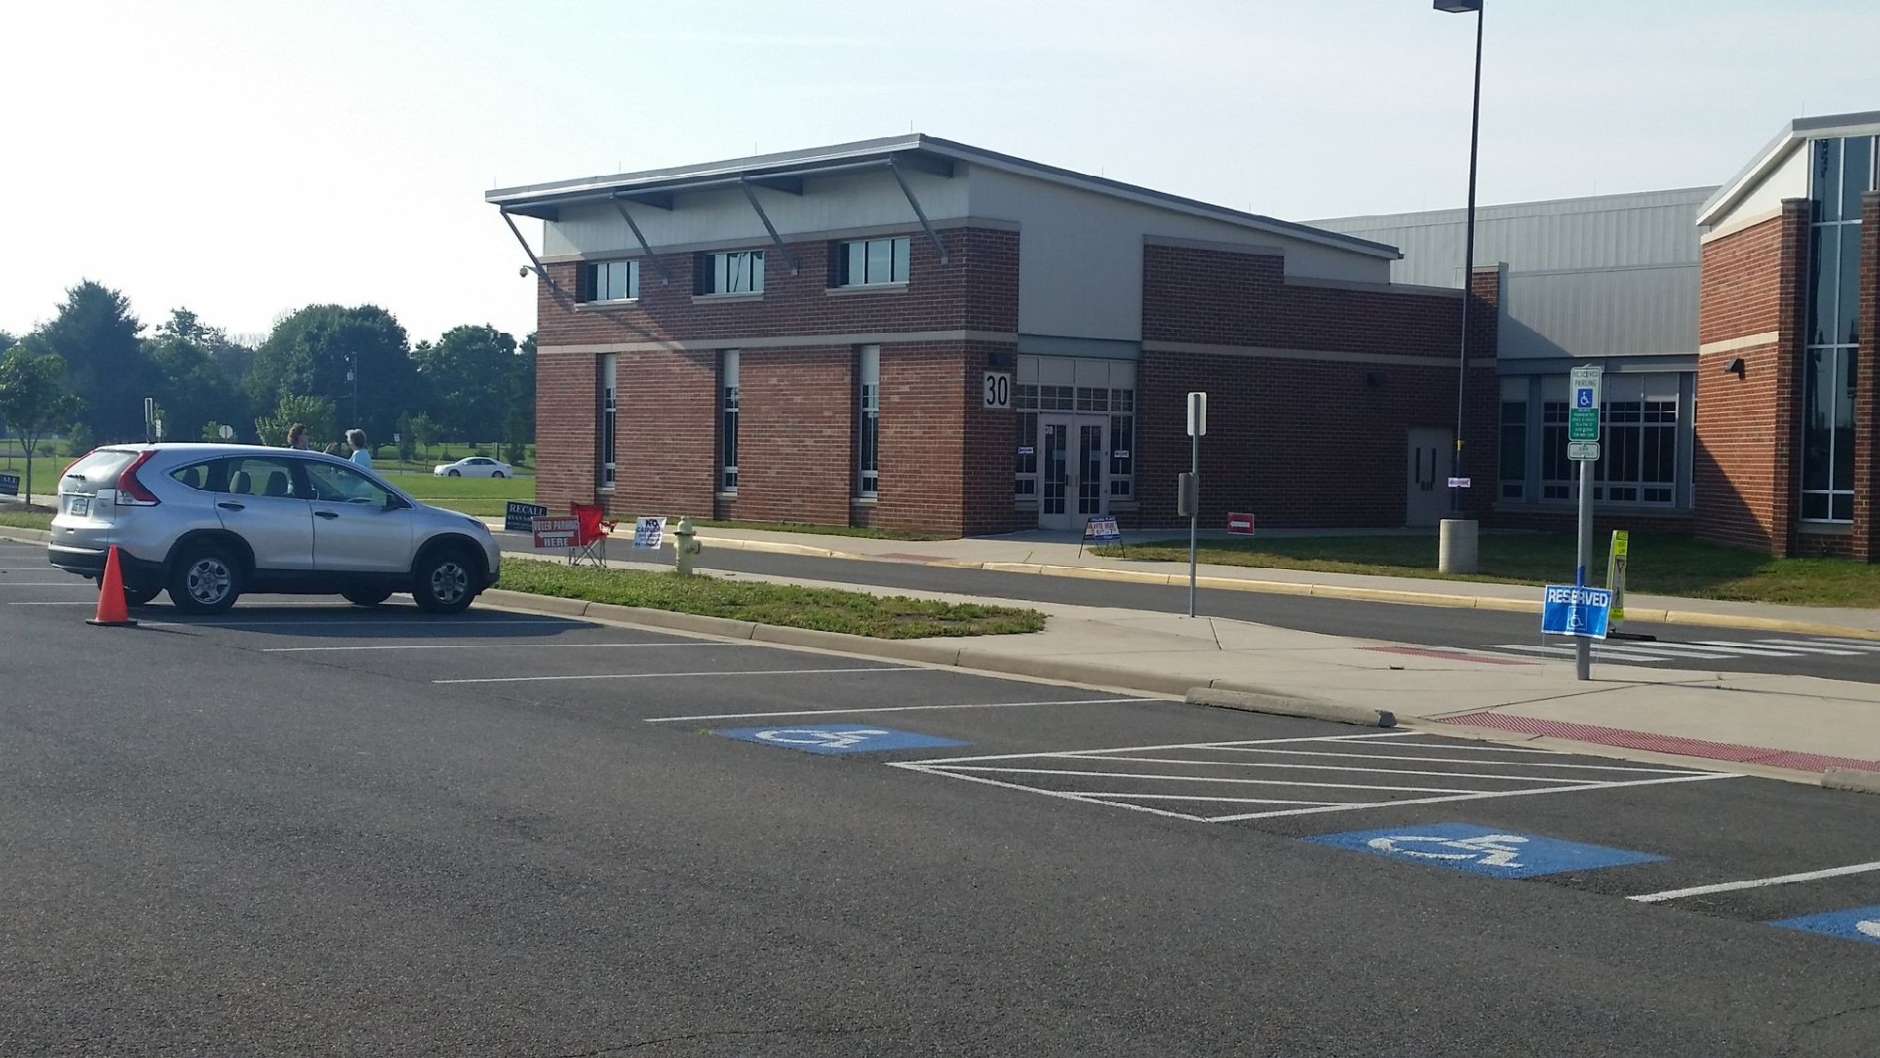 The polling station at Patriot High School in Nokesville is pretty quiet as of 10 a.m. Tuesday. (WTOP/Kathy Stewart)